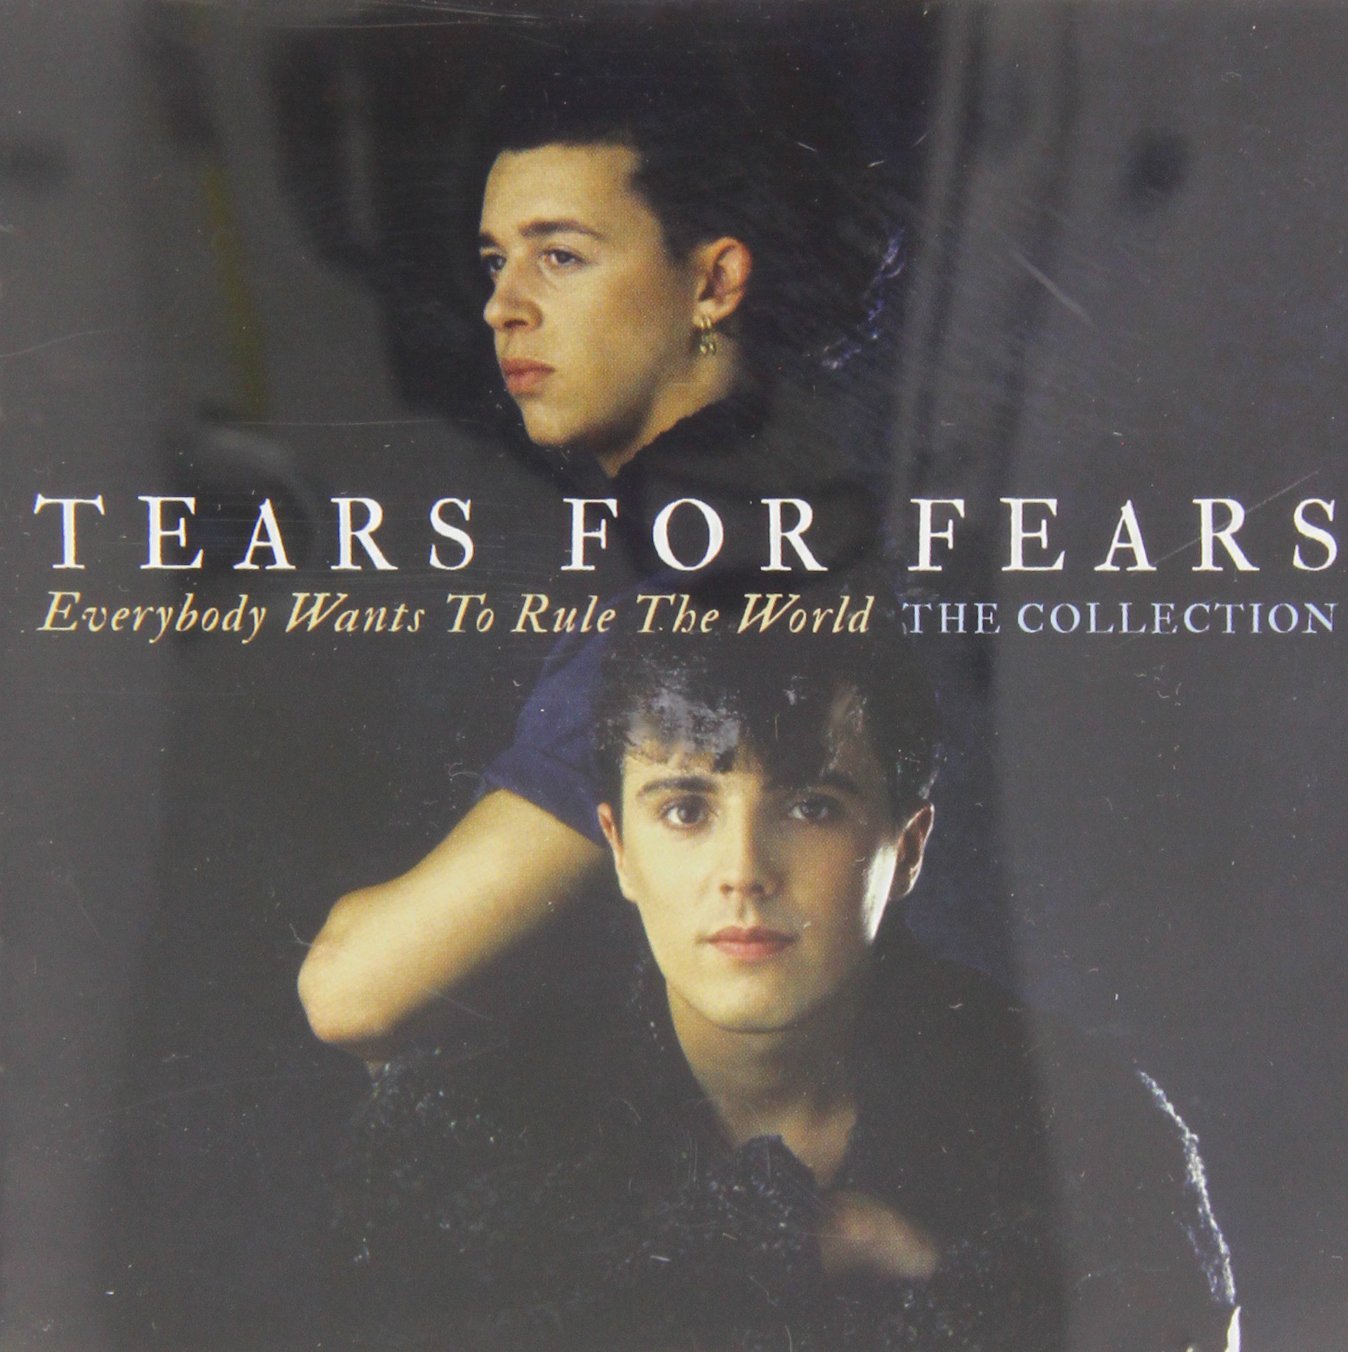 Tears for Fears - Everybody Wants to Rule the World (The Collection) (Music CD)